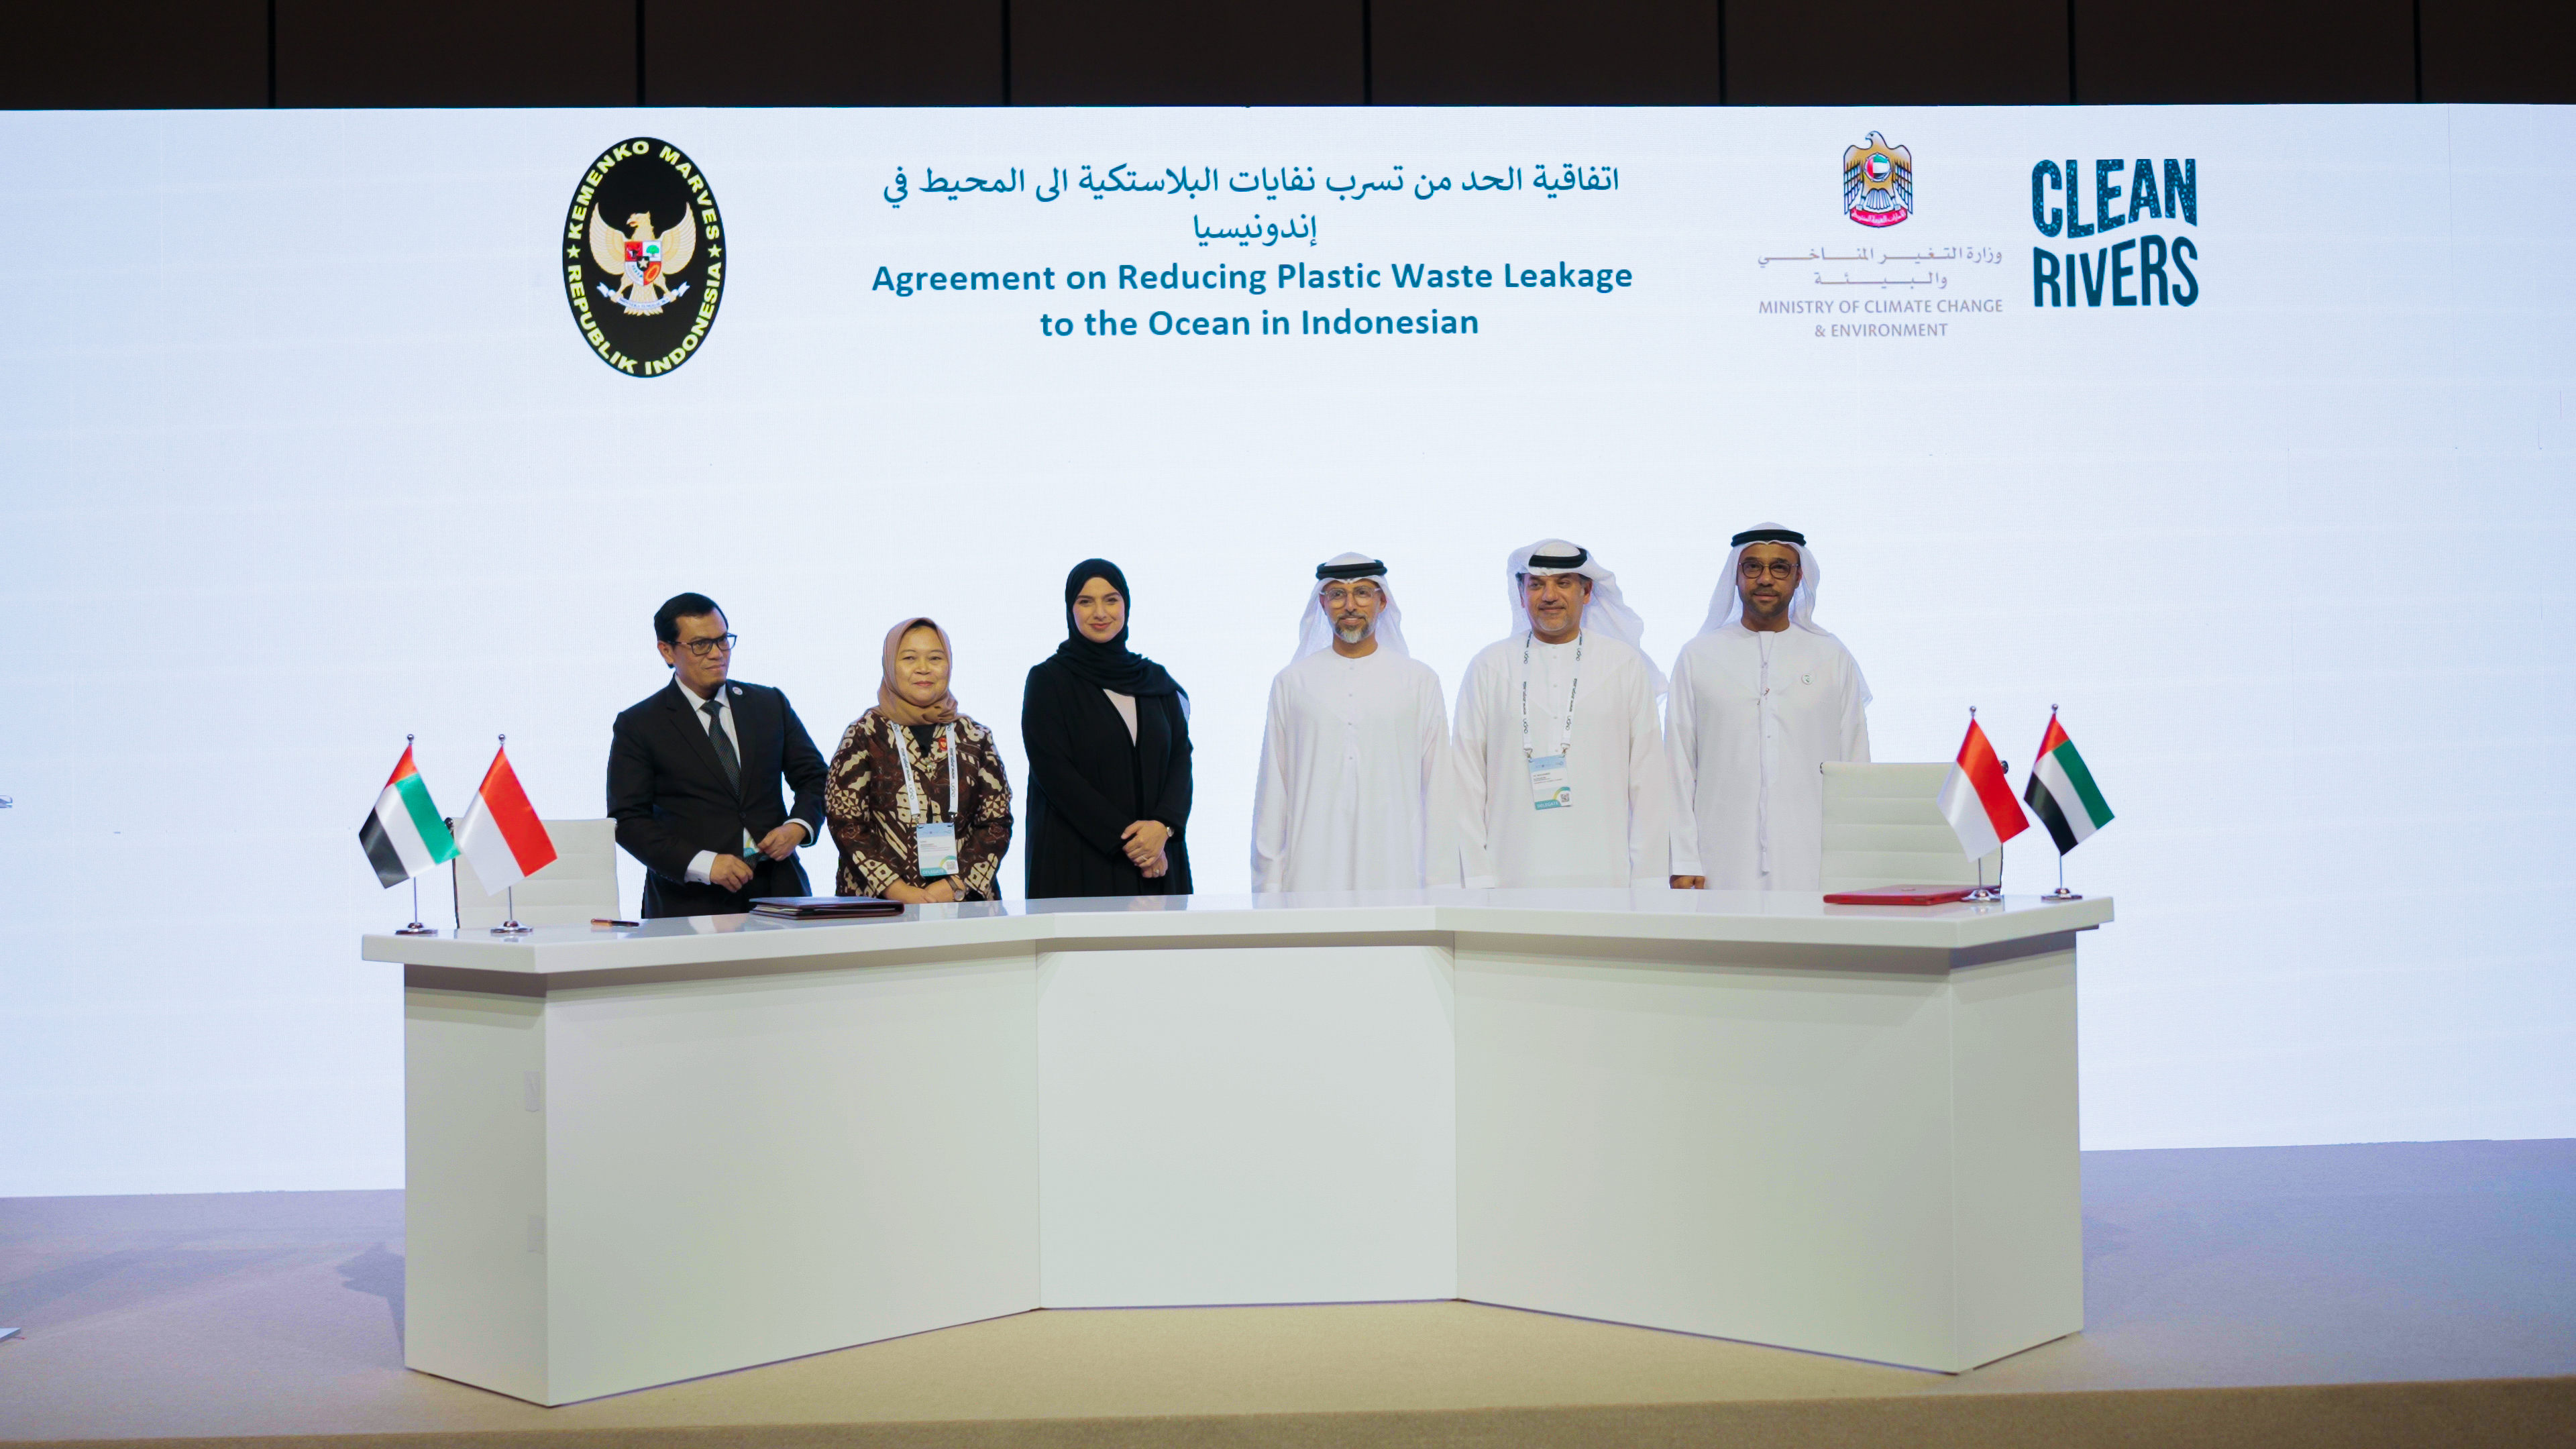 uae, indonesia partner to reduce waste leakage into oceans and rivers